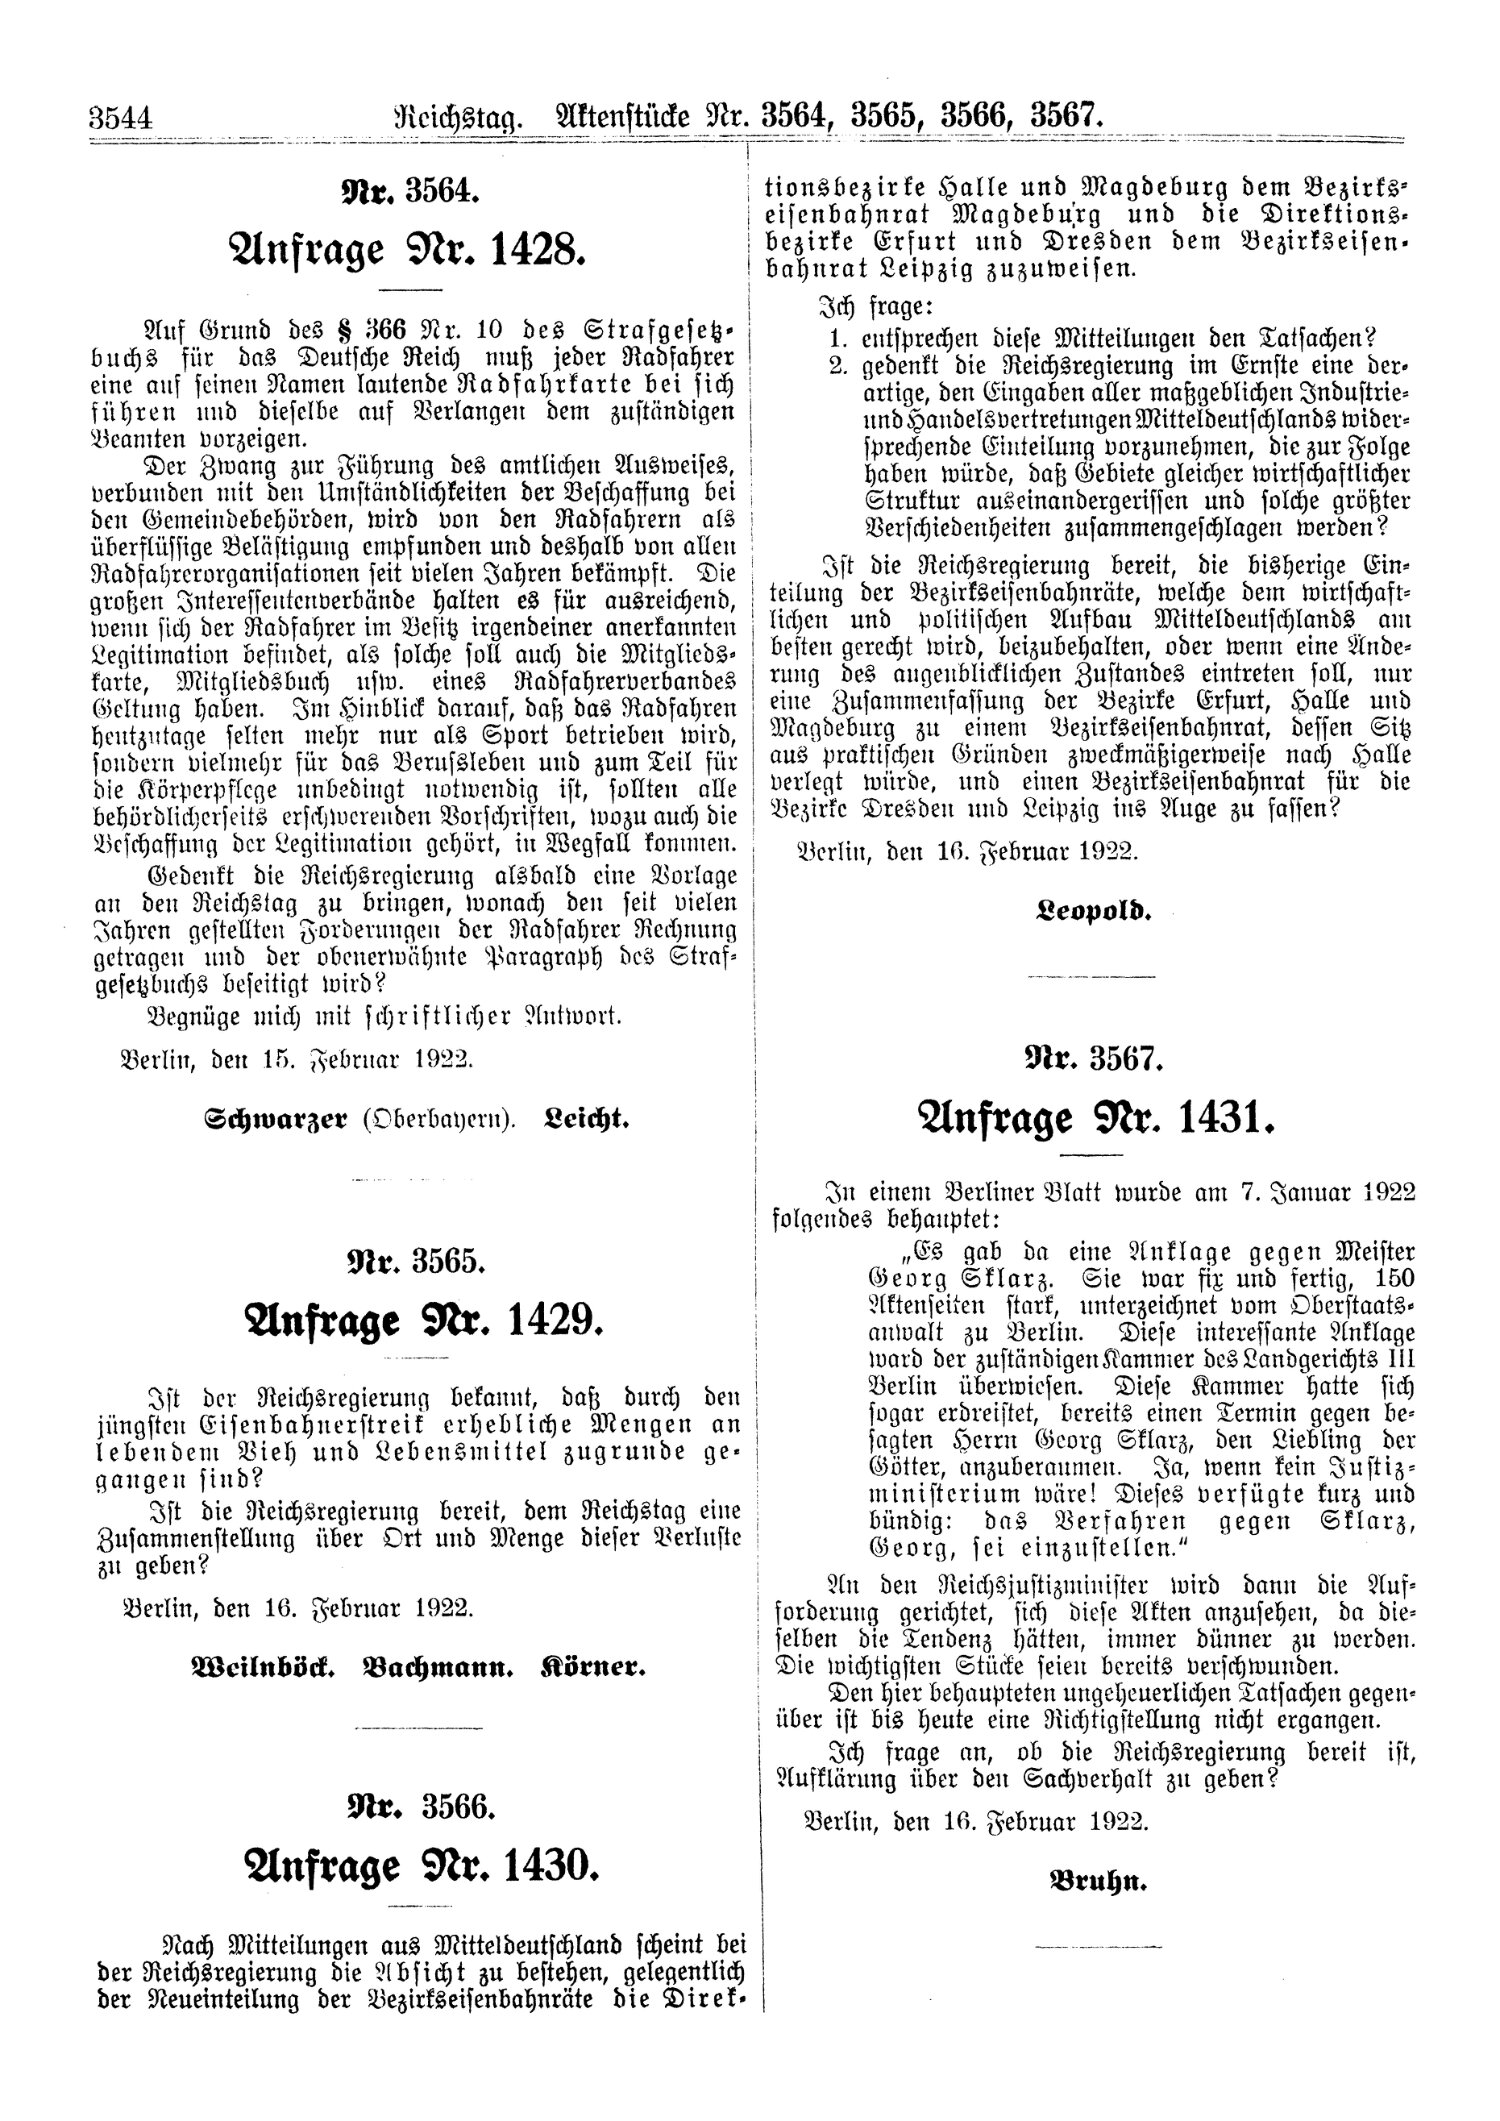 Scan of page 3544